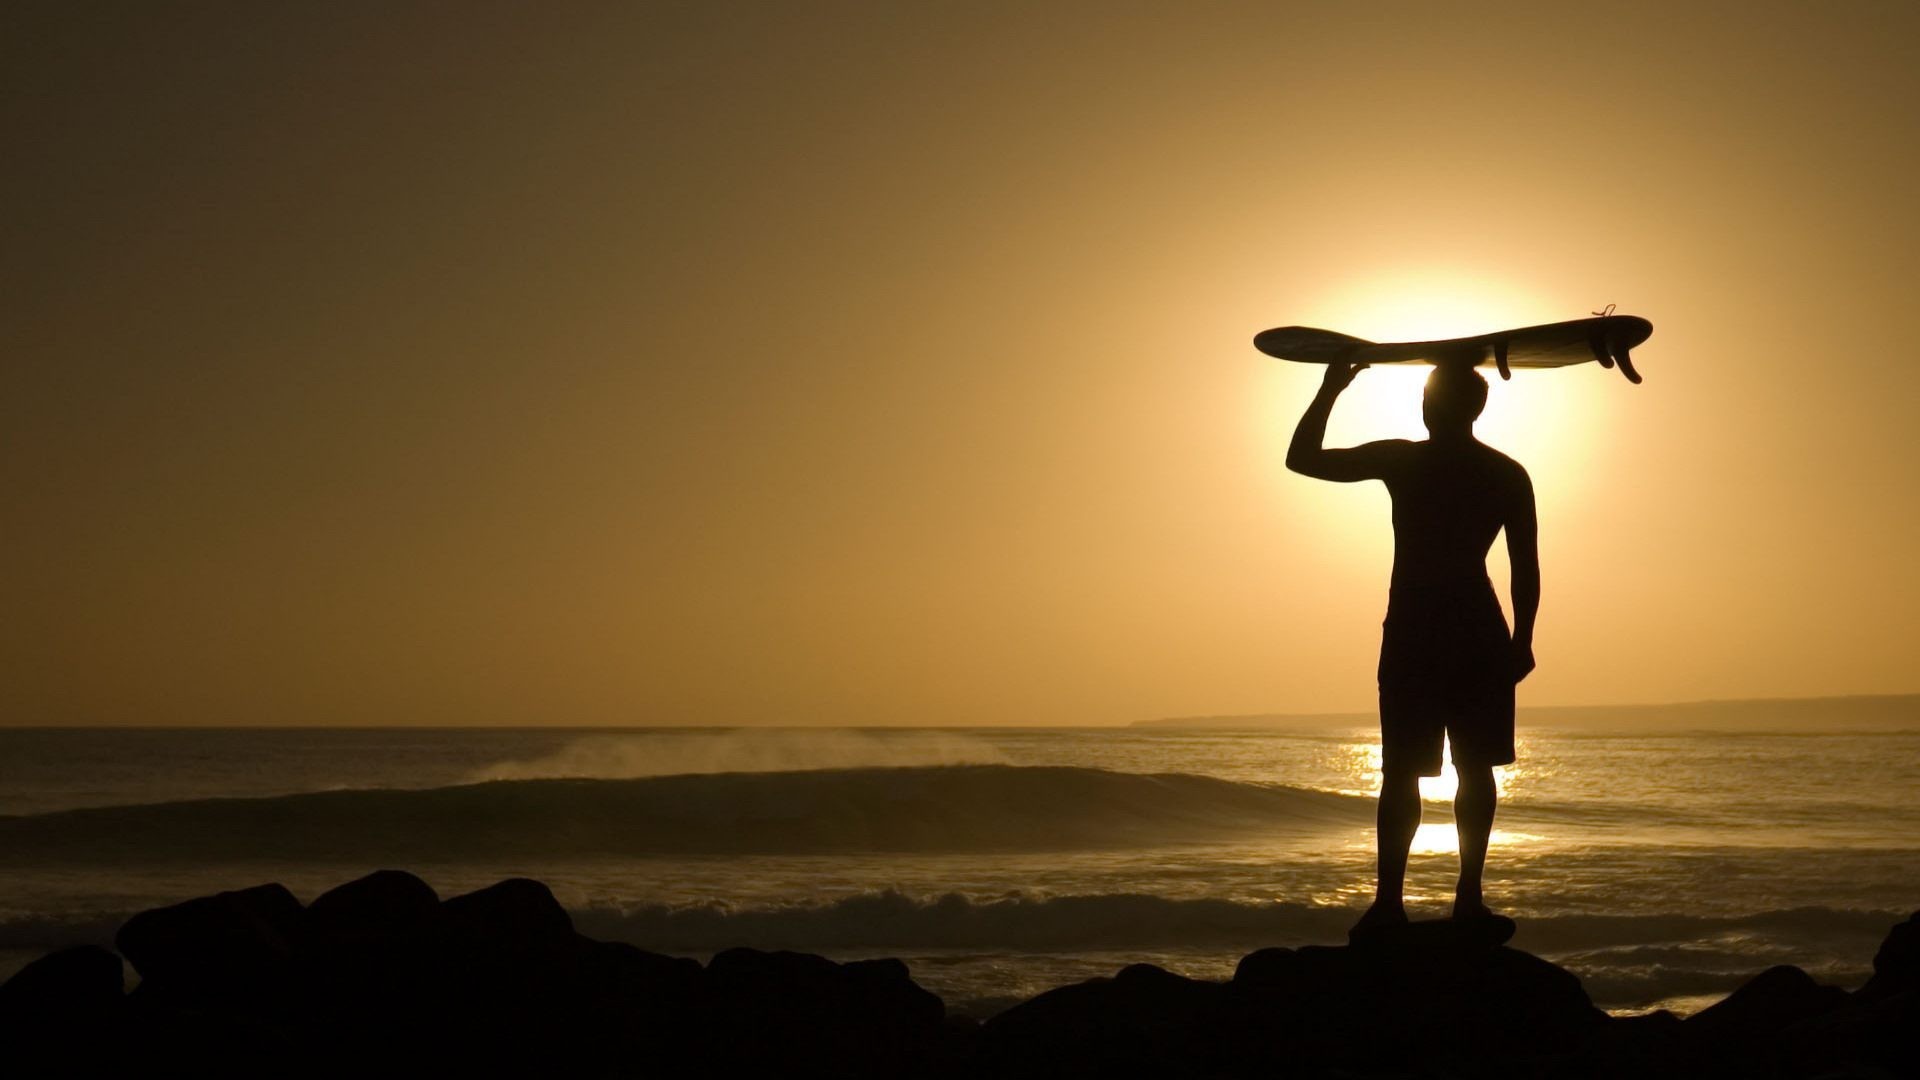 1920x1080 Image for Sunset Surfing HD Wallpaper